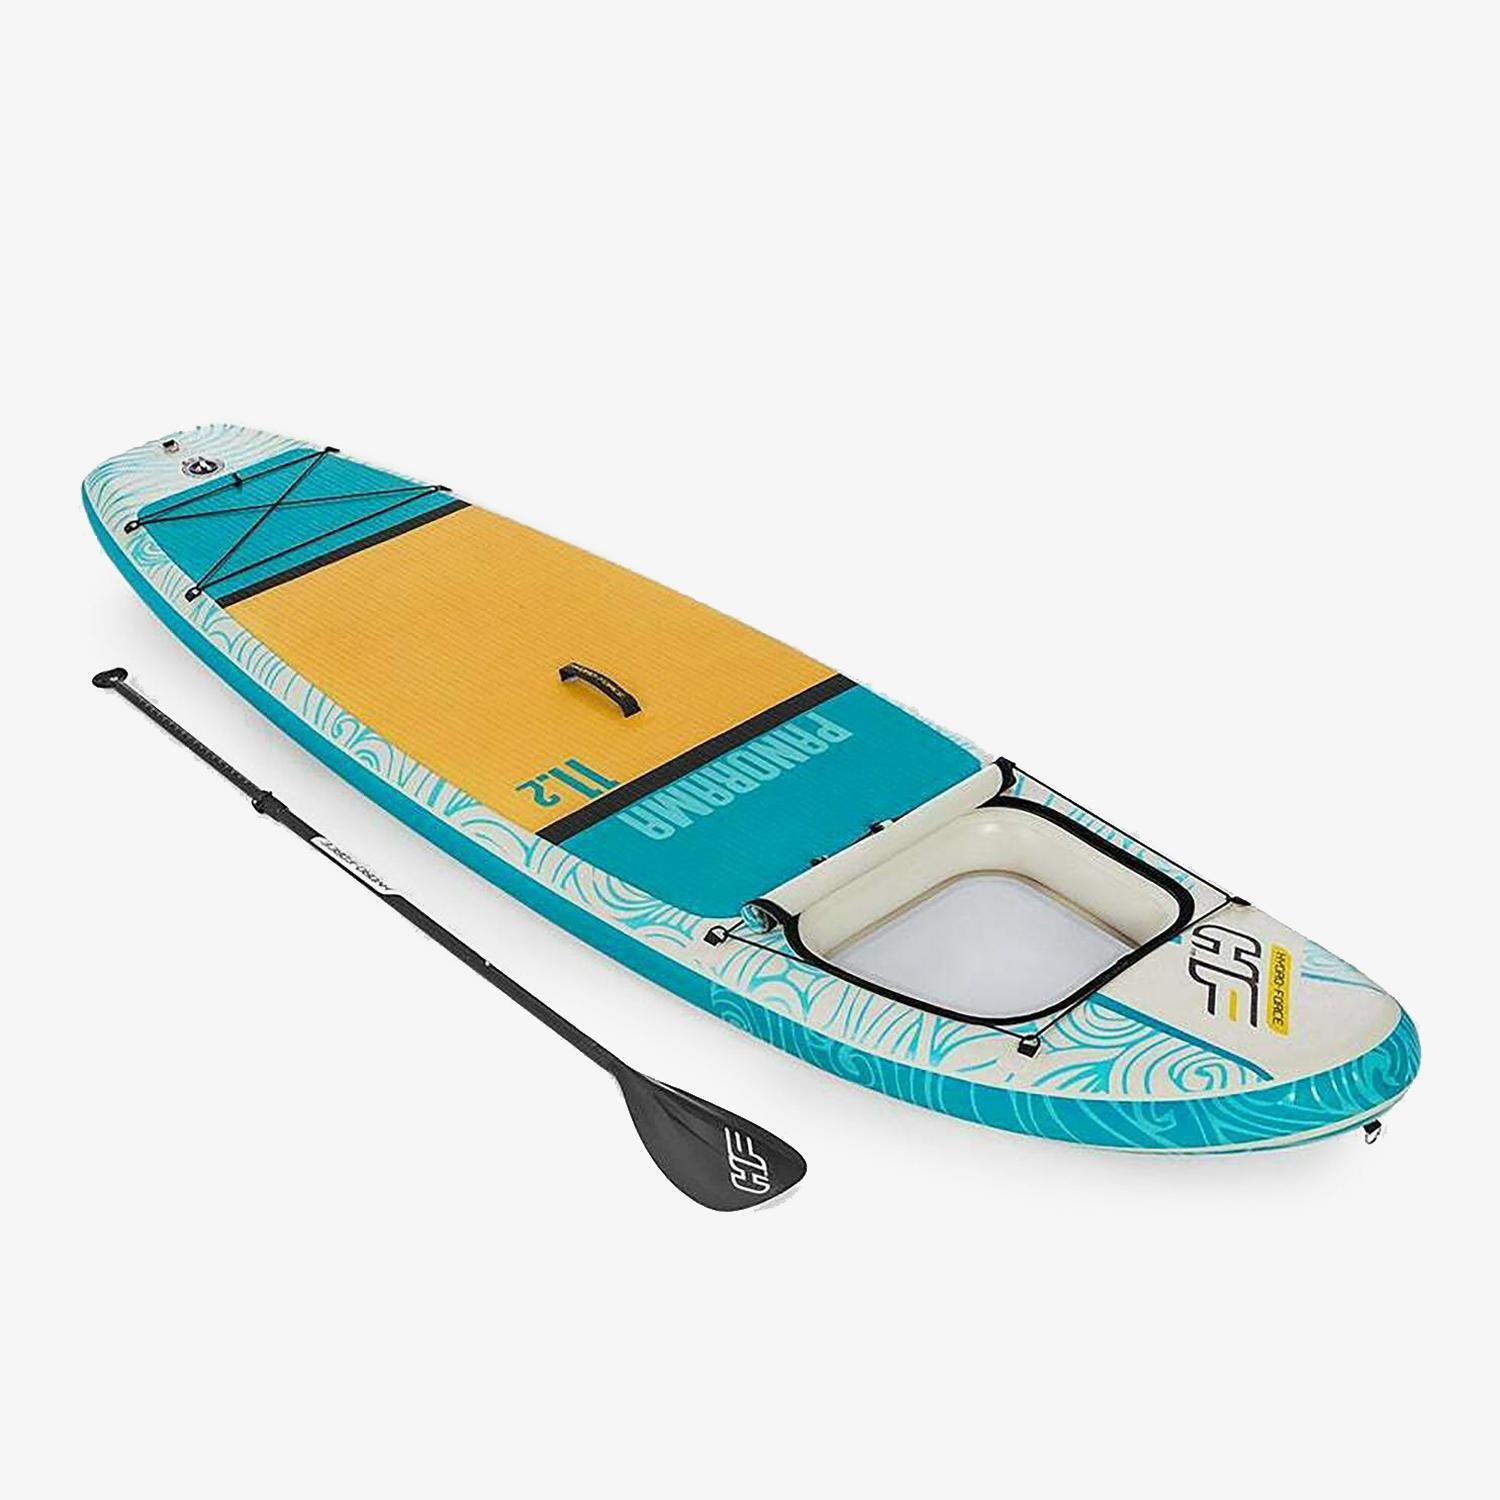 Hydro Force Panorama - - Planche Paddle Surf sports MKP taille UNICA